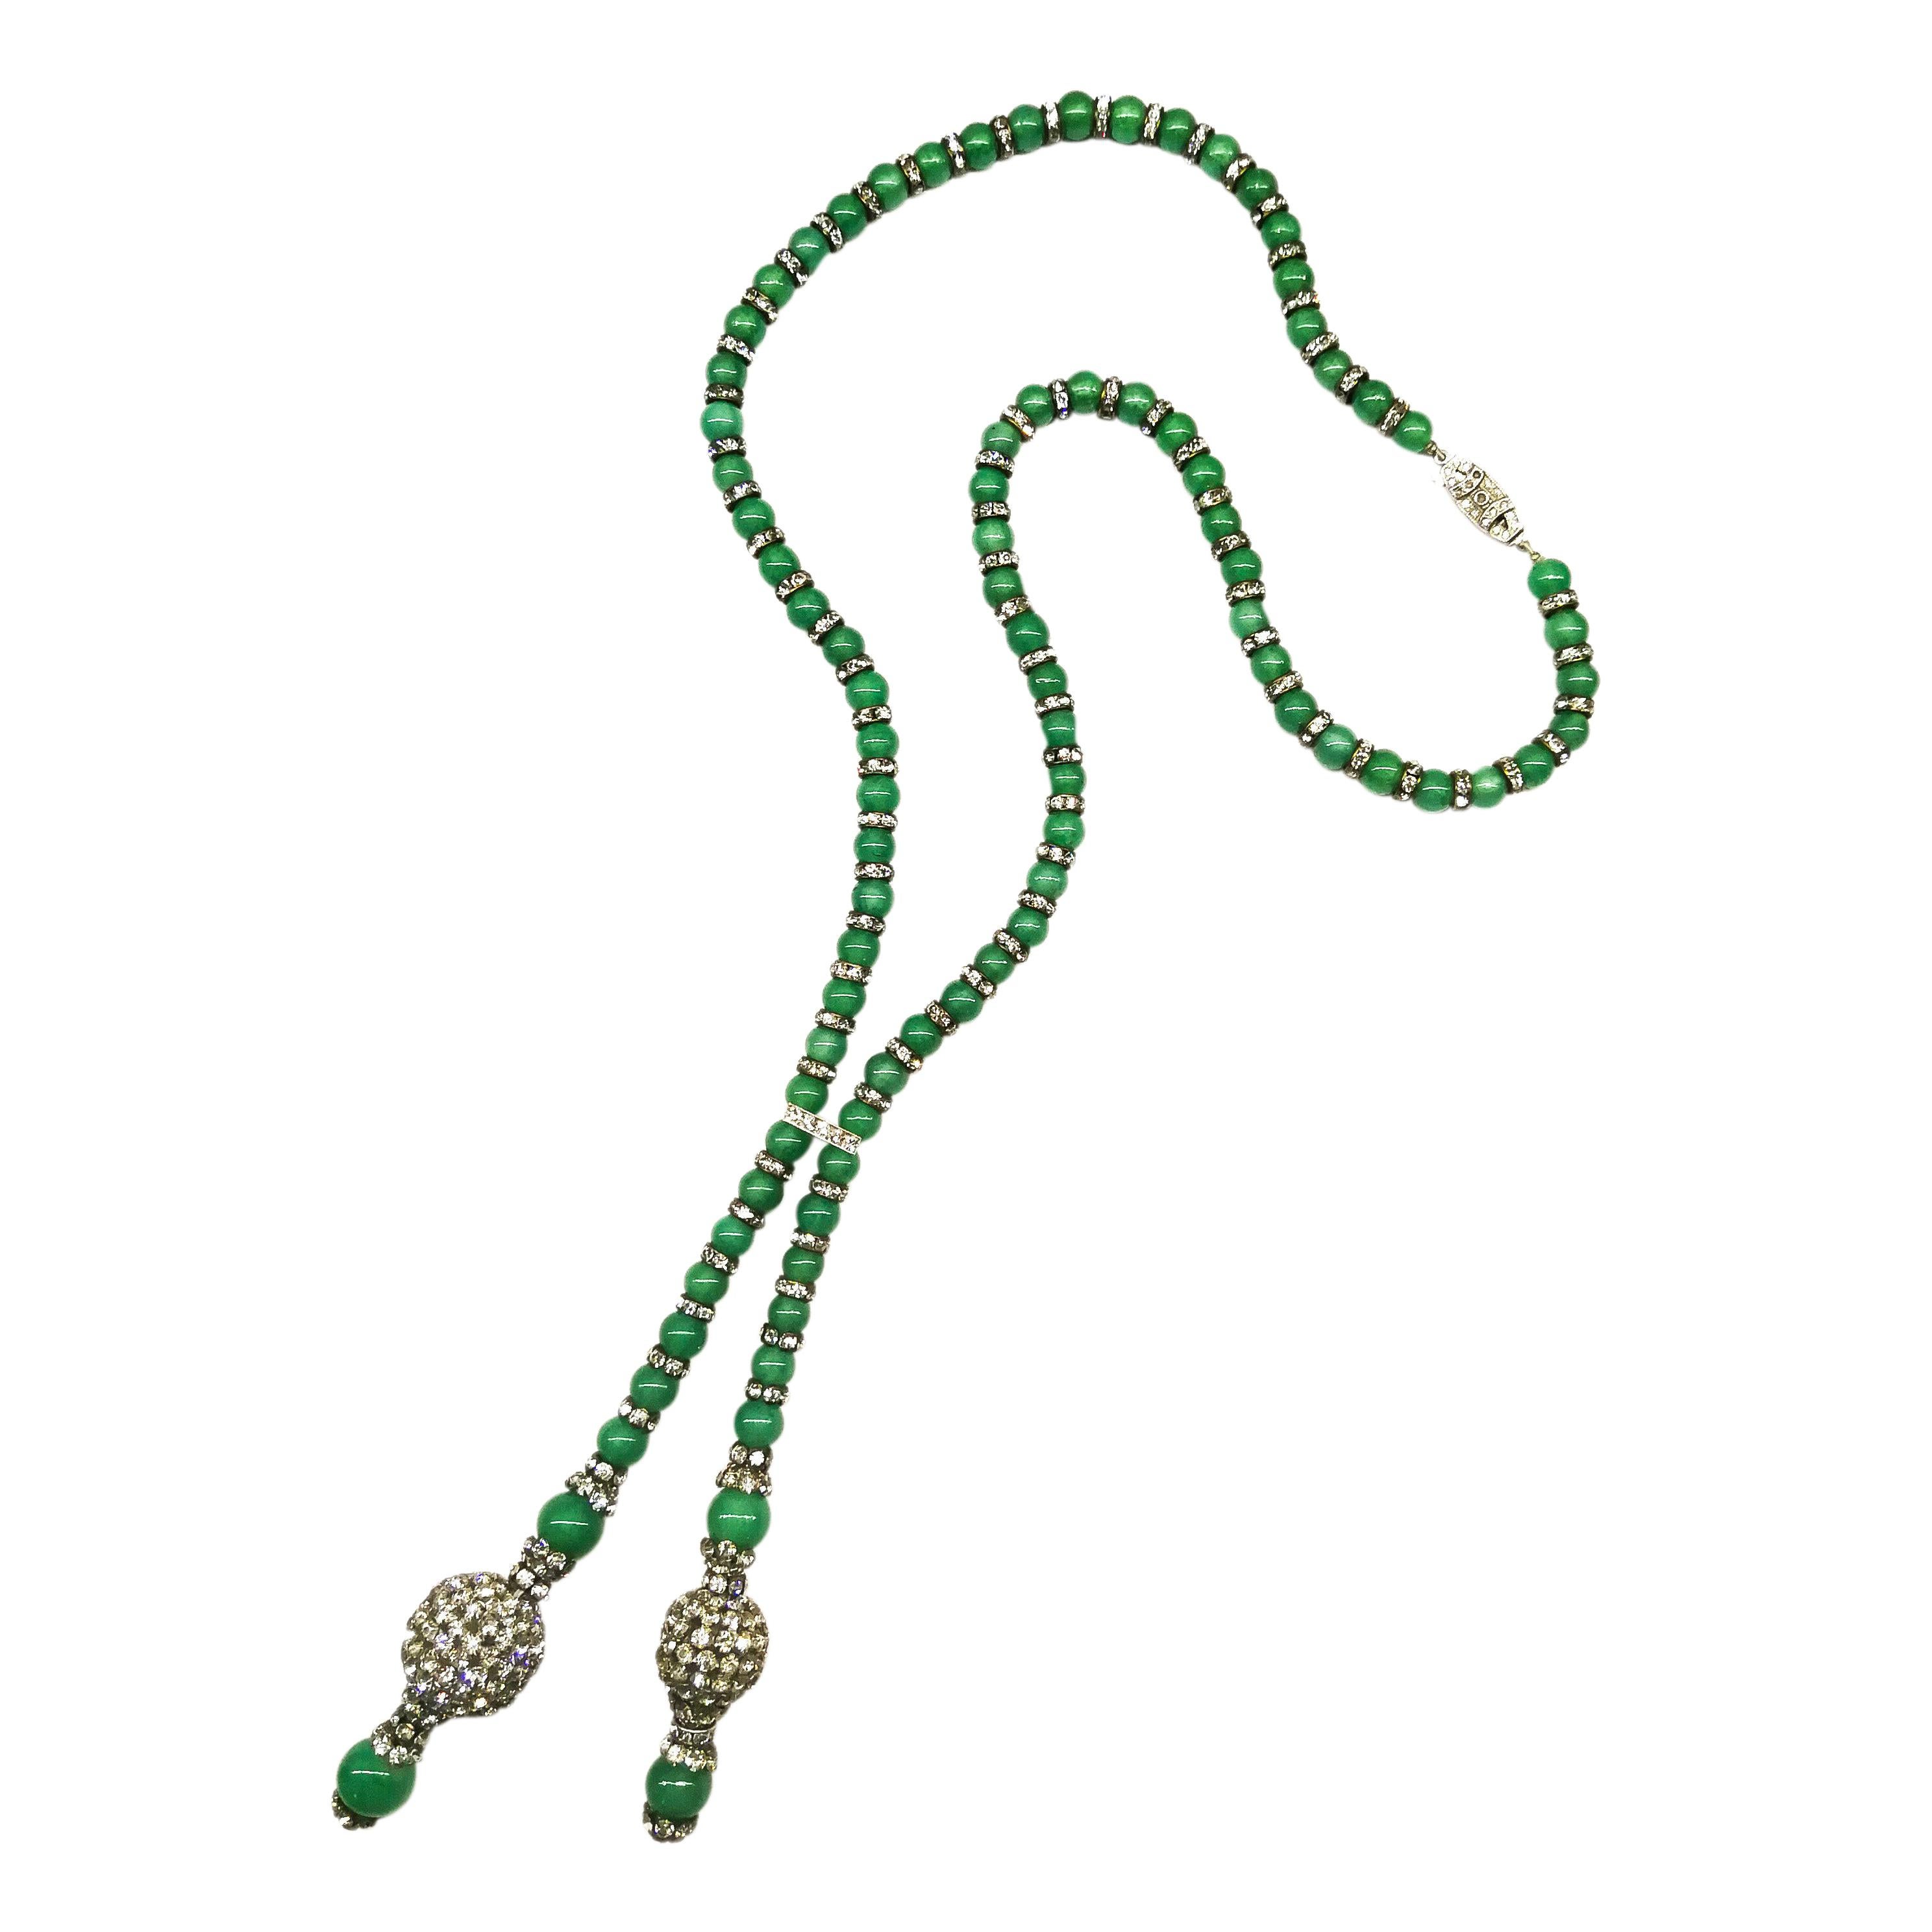 Jade glass bead and clear paste lariatt-style necklace/sautoir, French, 1920s